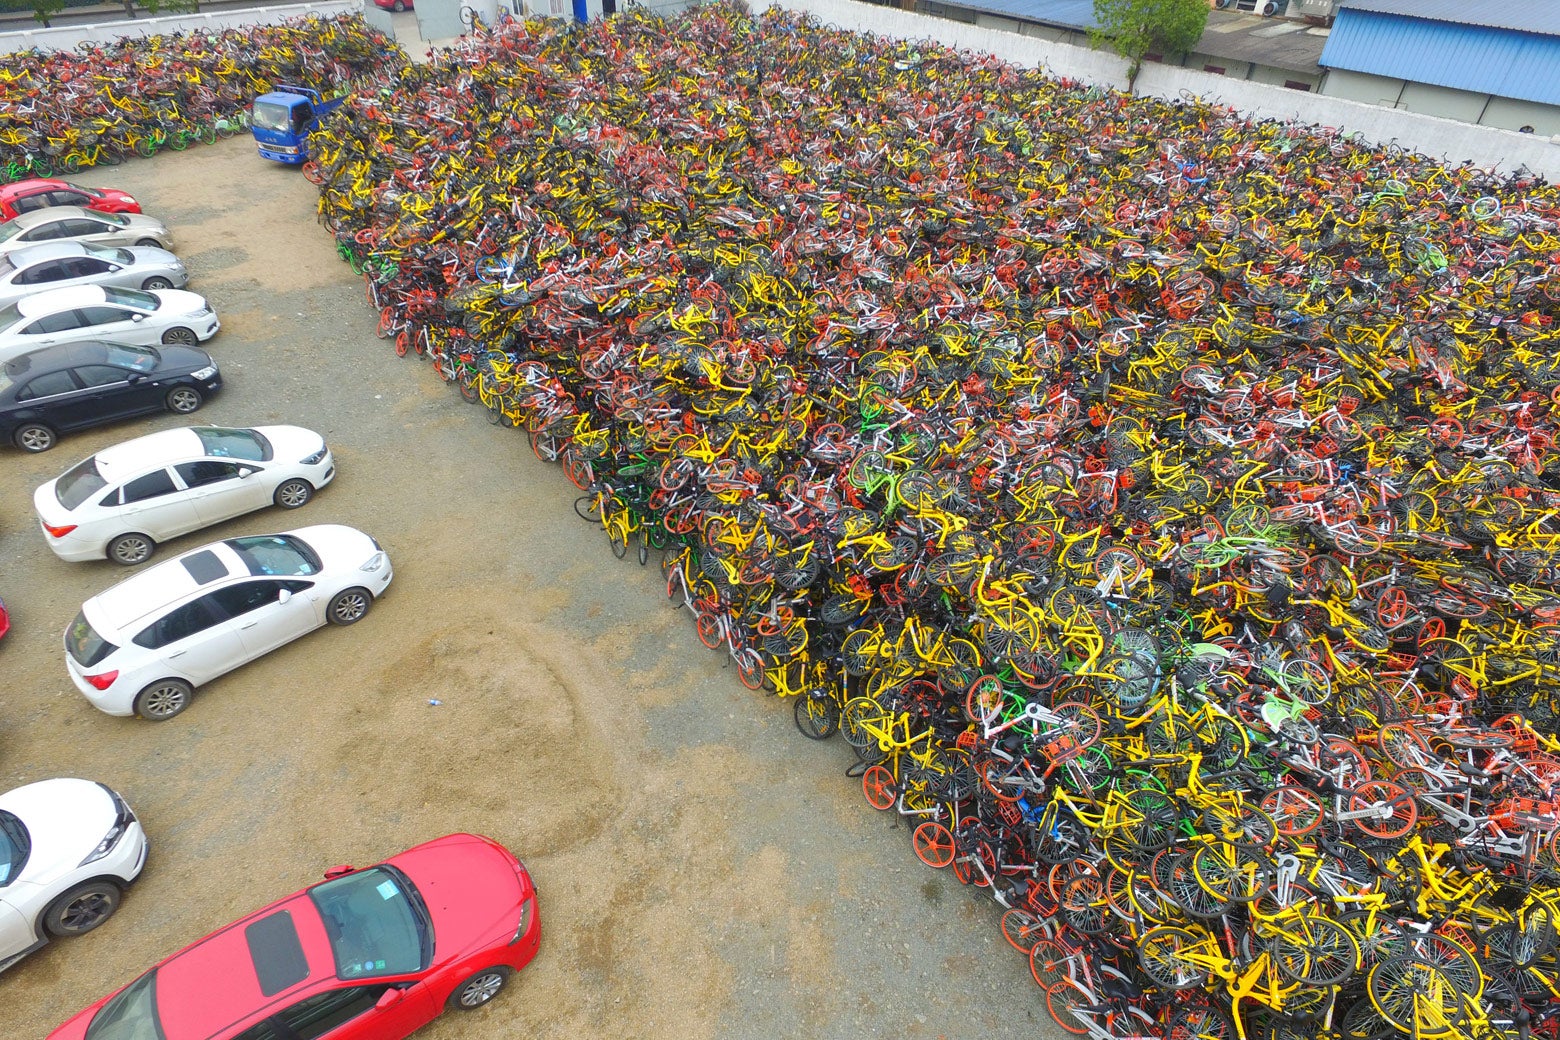 Tens of thousands of abandoned shared bikes pile up at a parking lot in the Jiangning District of Nanjing, China, on Nov. 28.